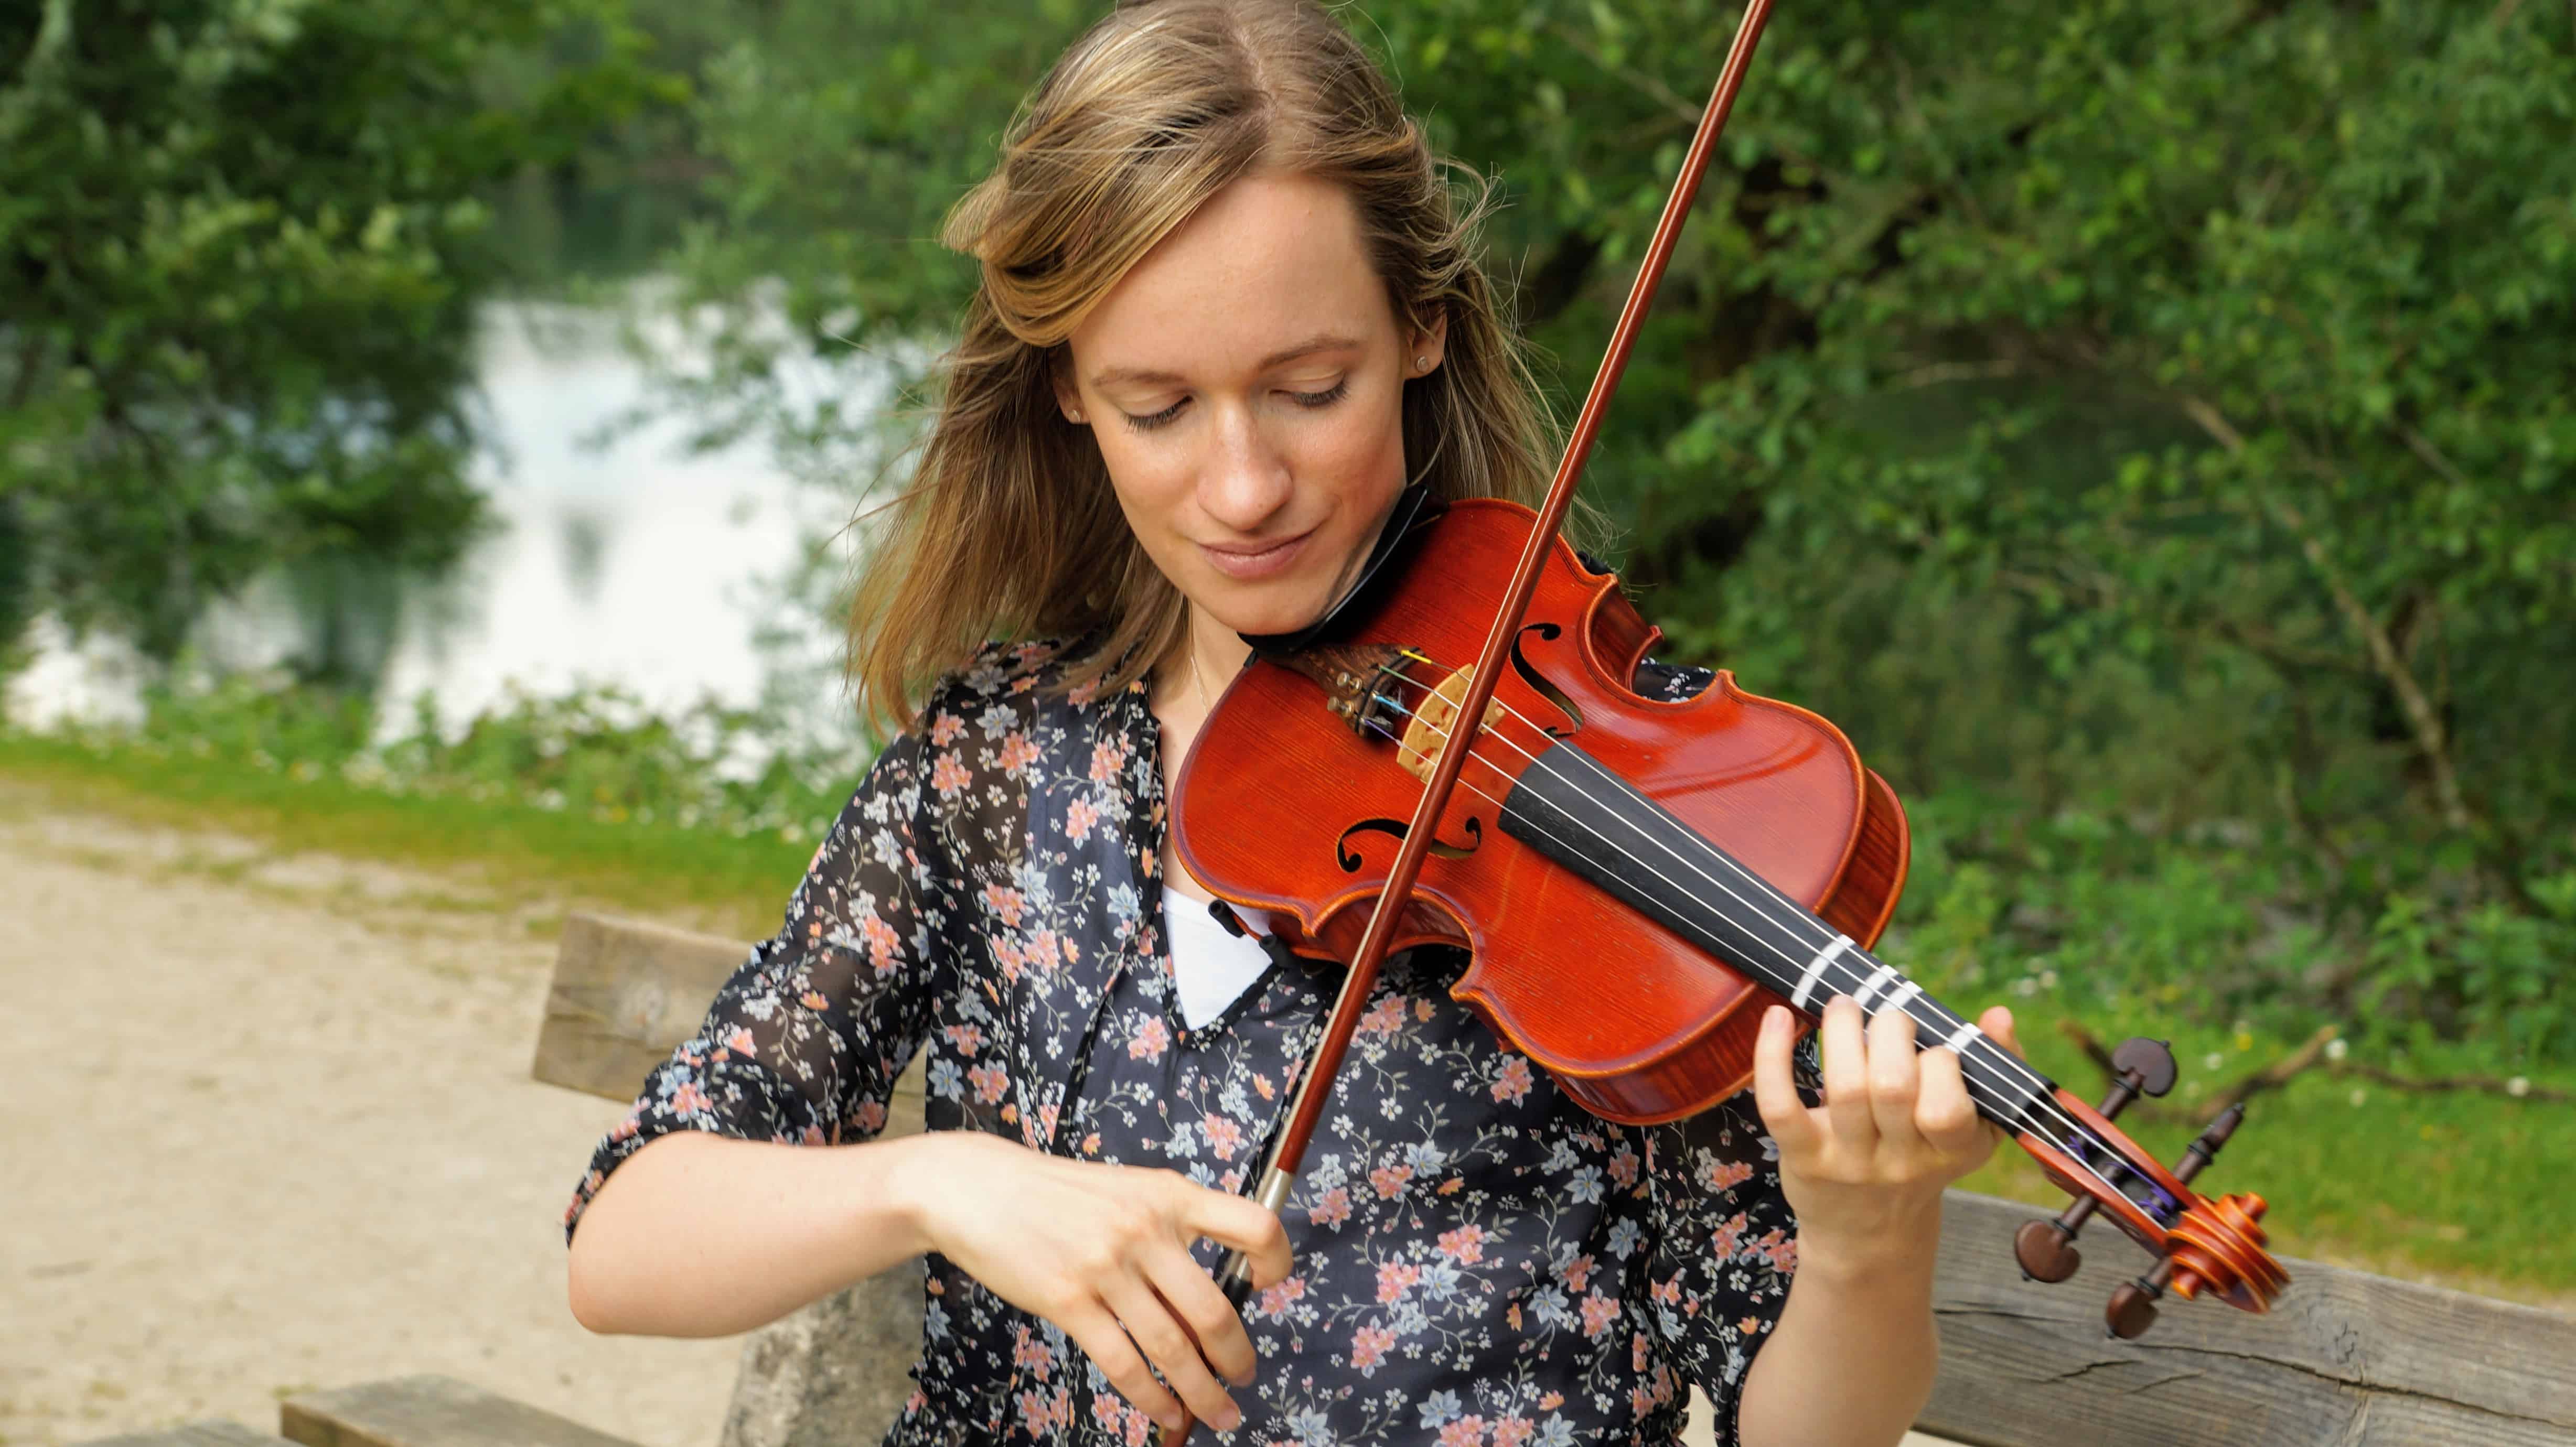 Violin Open Strings - an Easy Guide for a Violin Newbie - Violinspiration